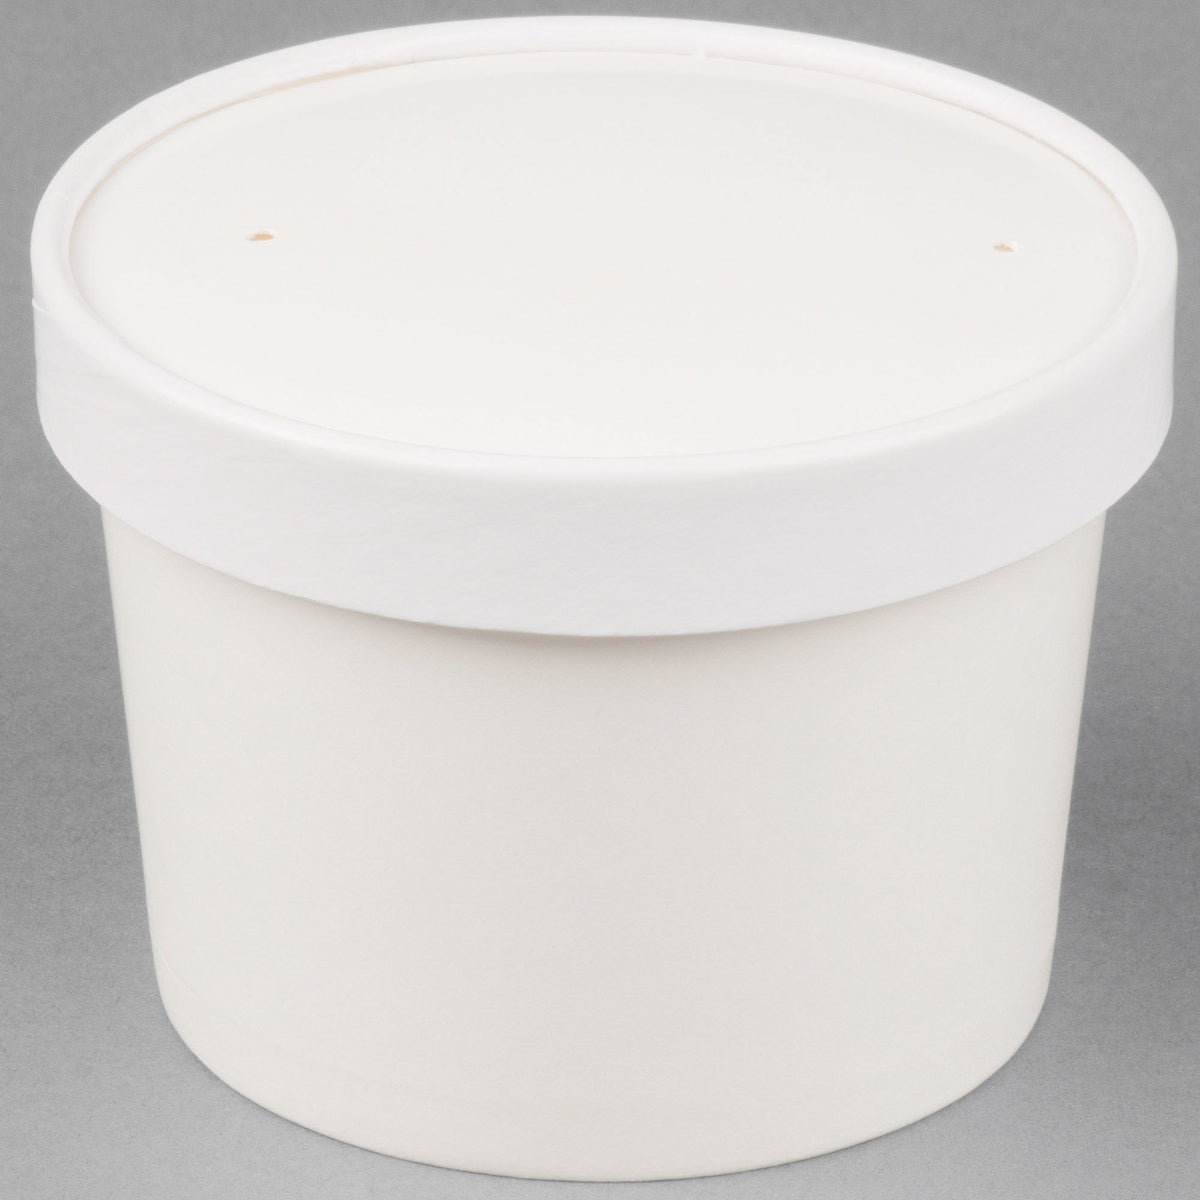 White Paper Round Food & Soup Containers With Vented Lids Recyclable 12 Oz.  -  Israel